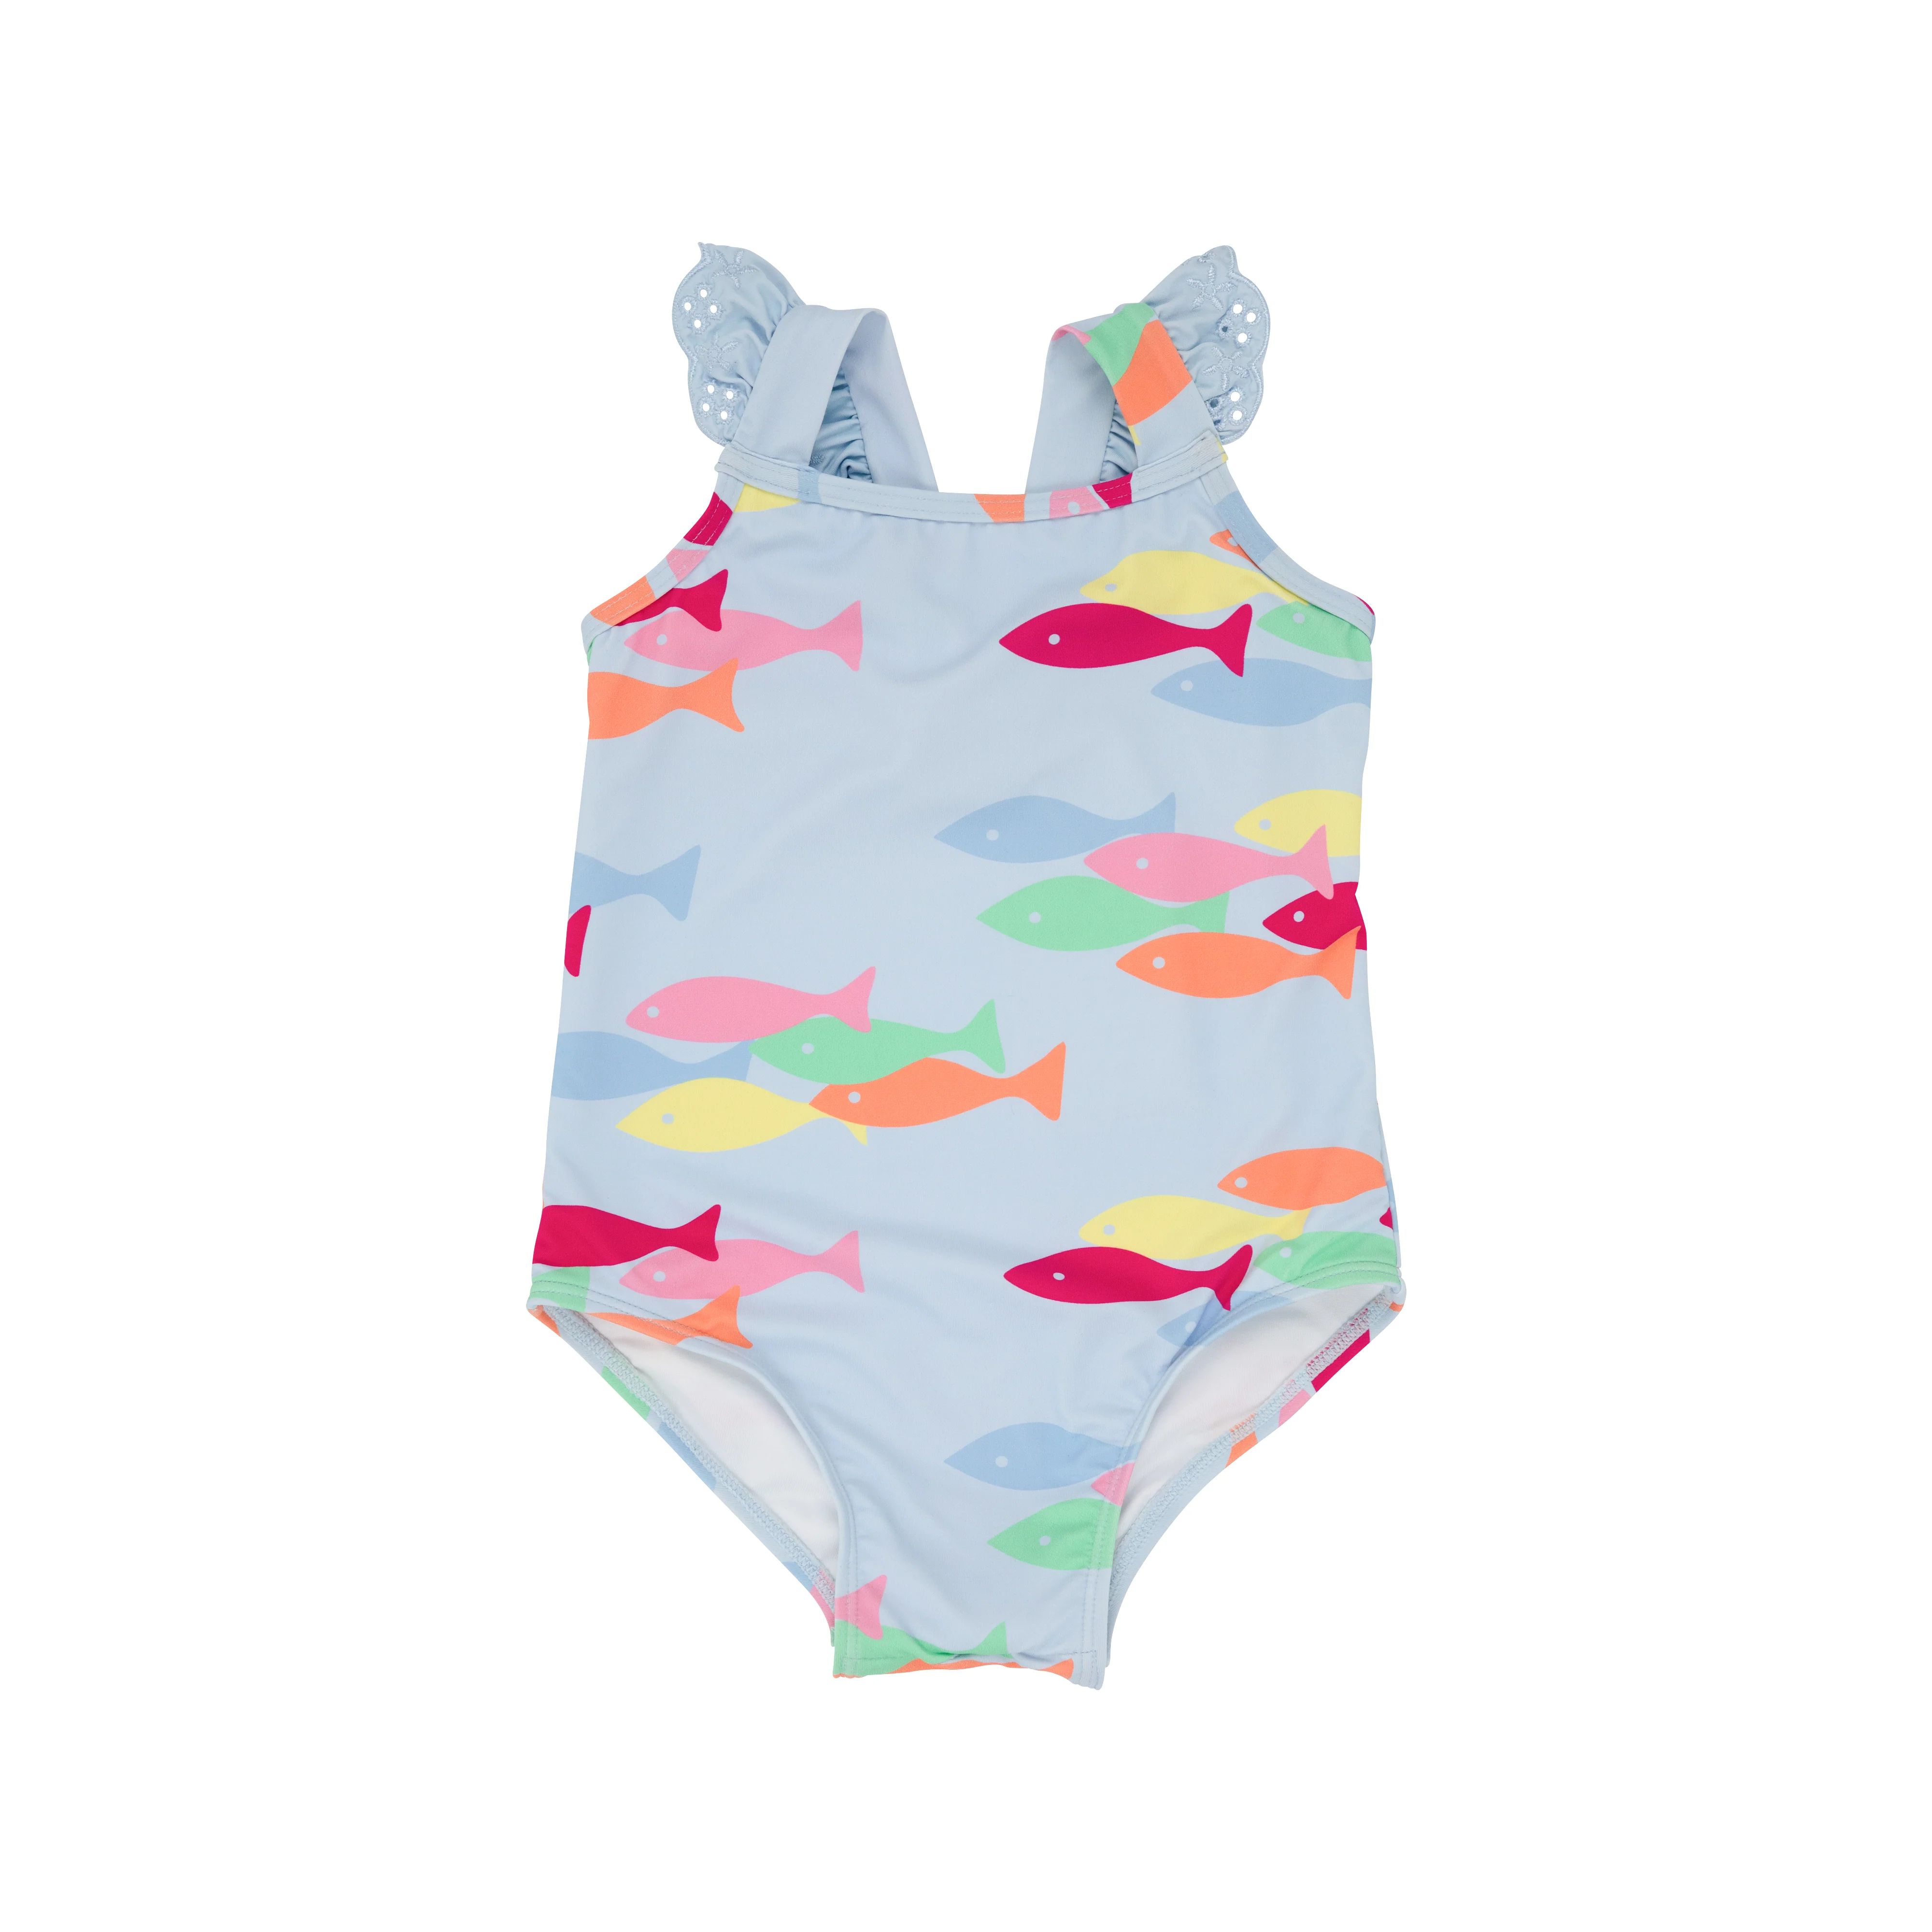 Long Bay Bathing Suit - French Leave Fishies with Beale Street Blue | The Beaufort Bonnet Company